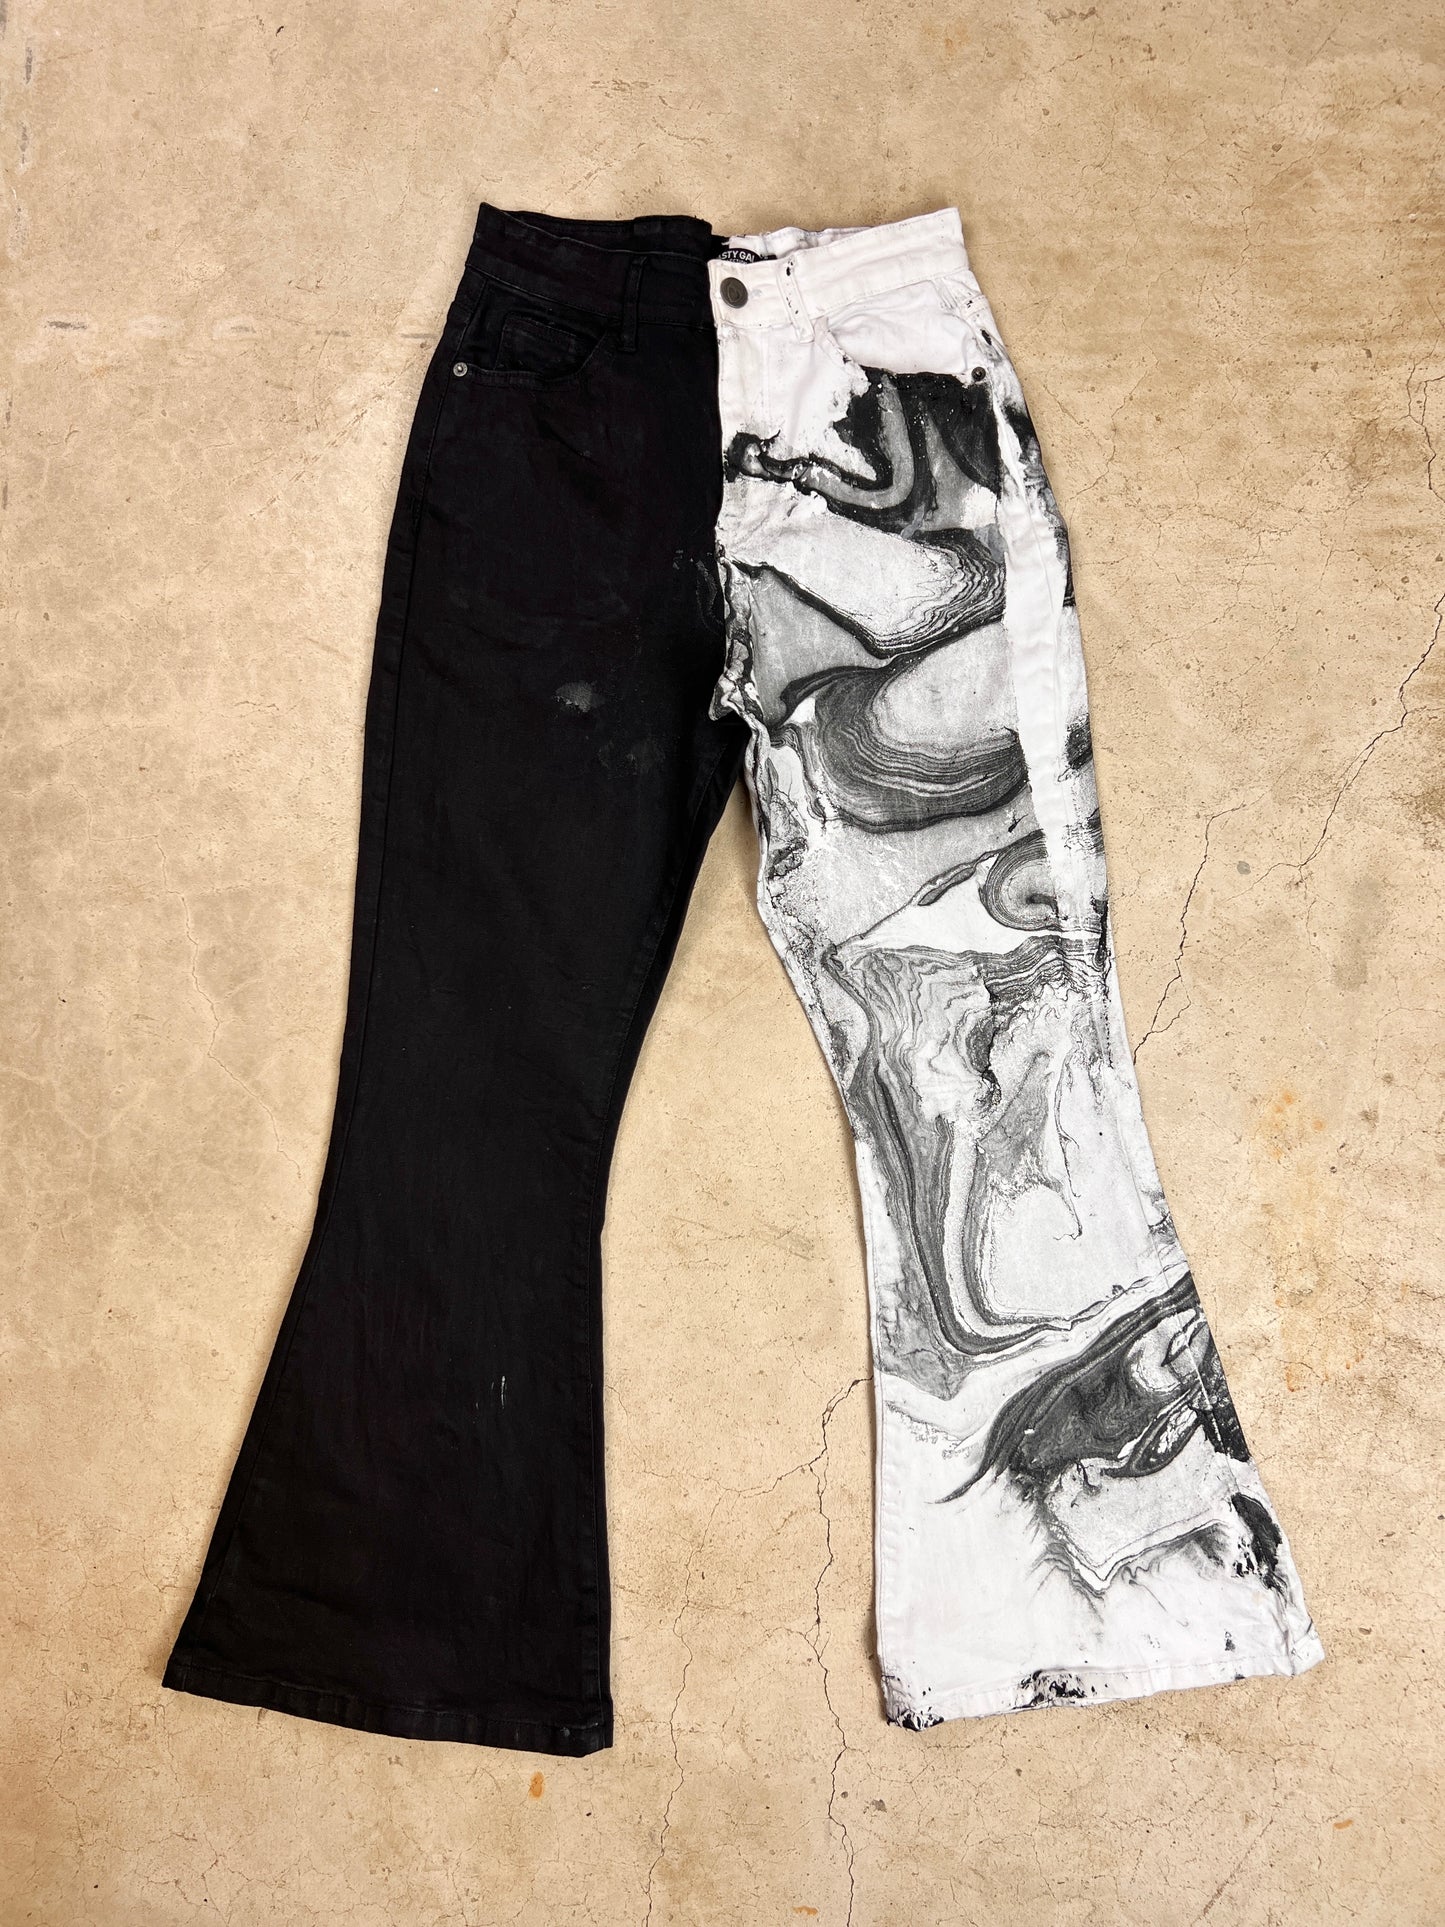 The Marbled Yin Yang Flare Leg Jeans - 25/27"